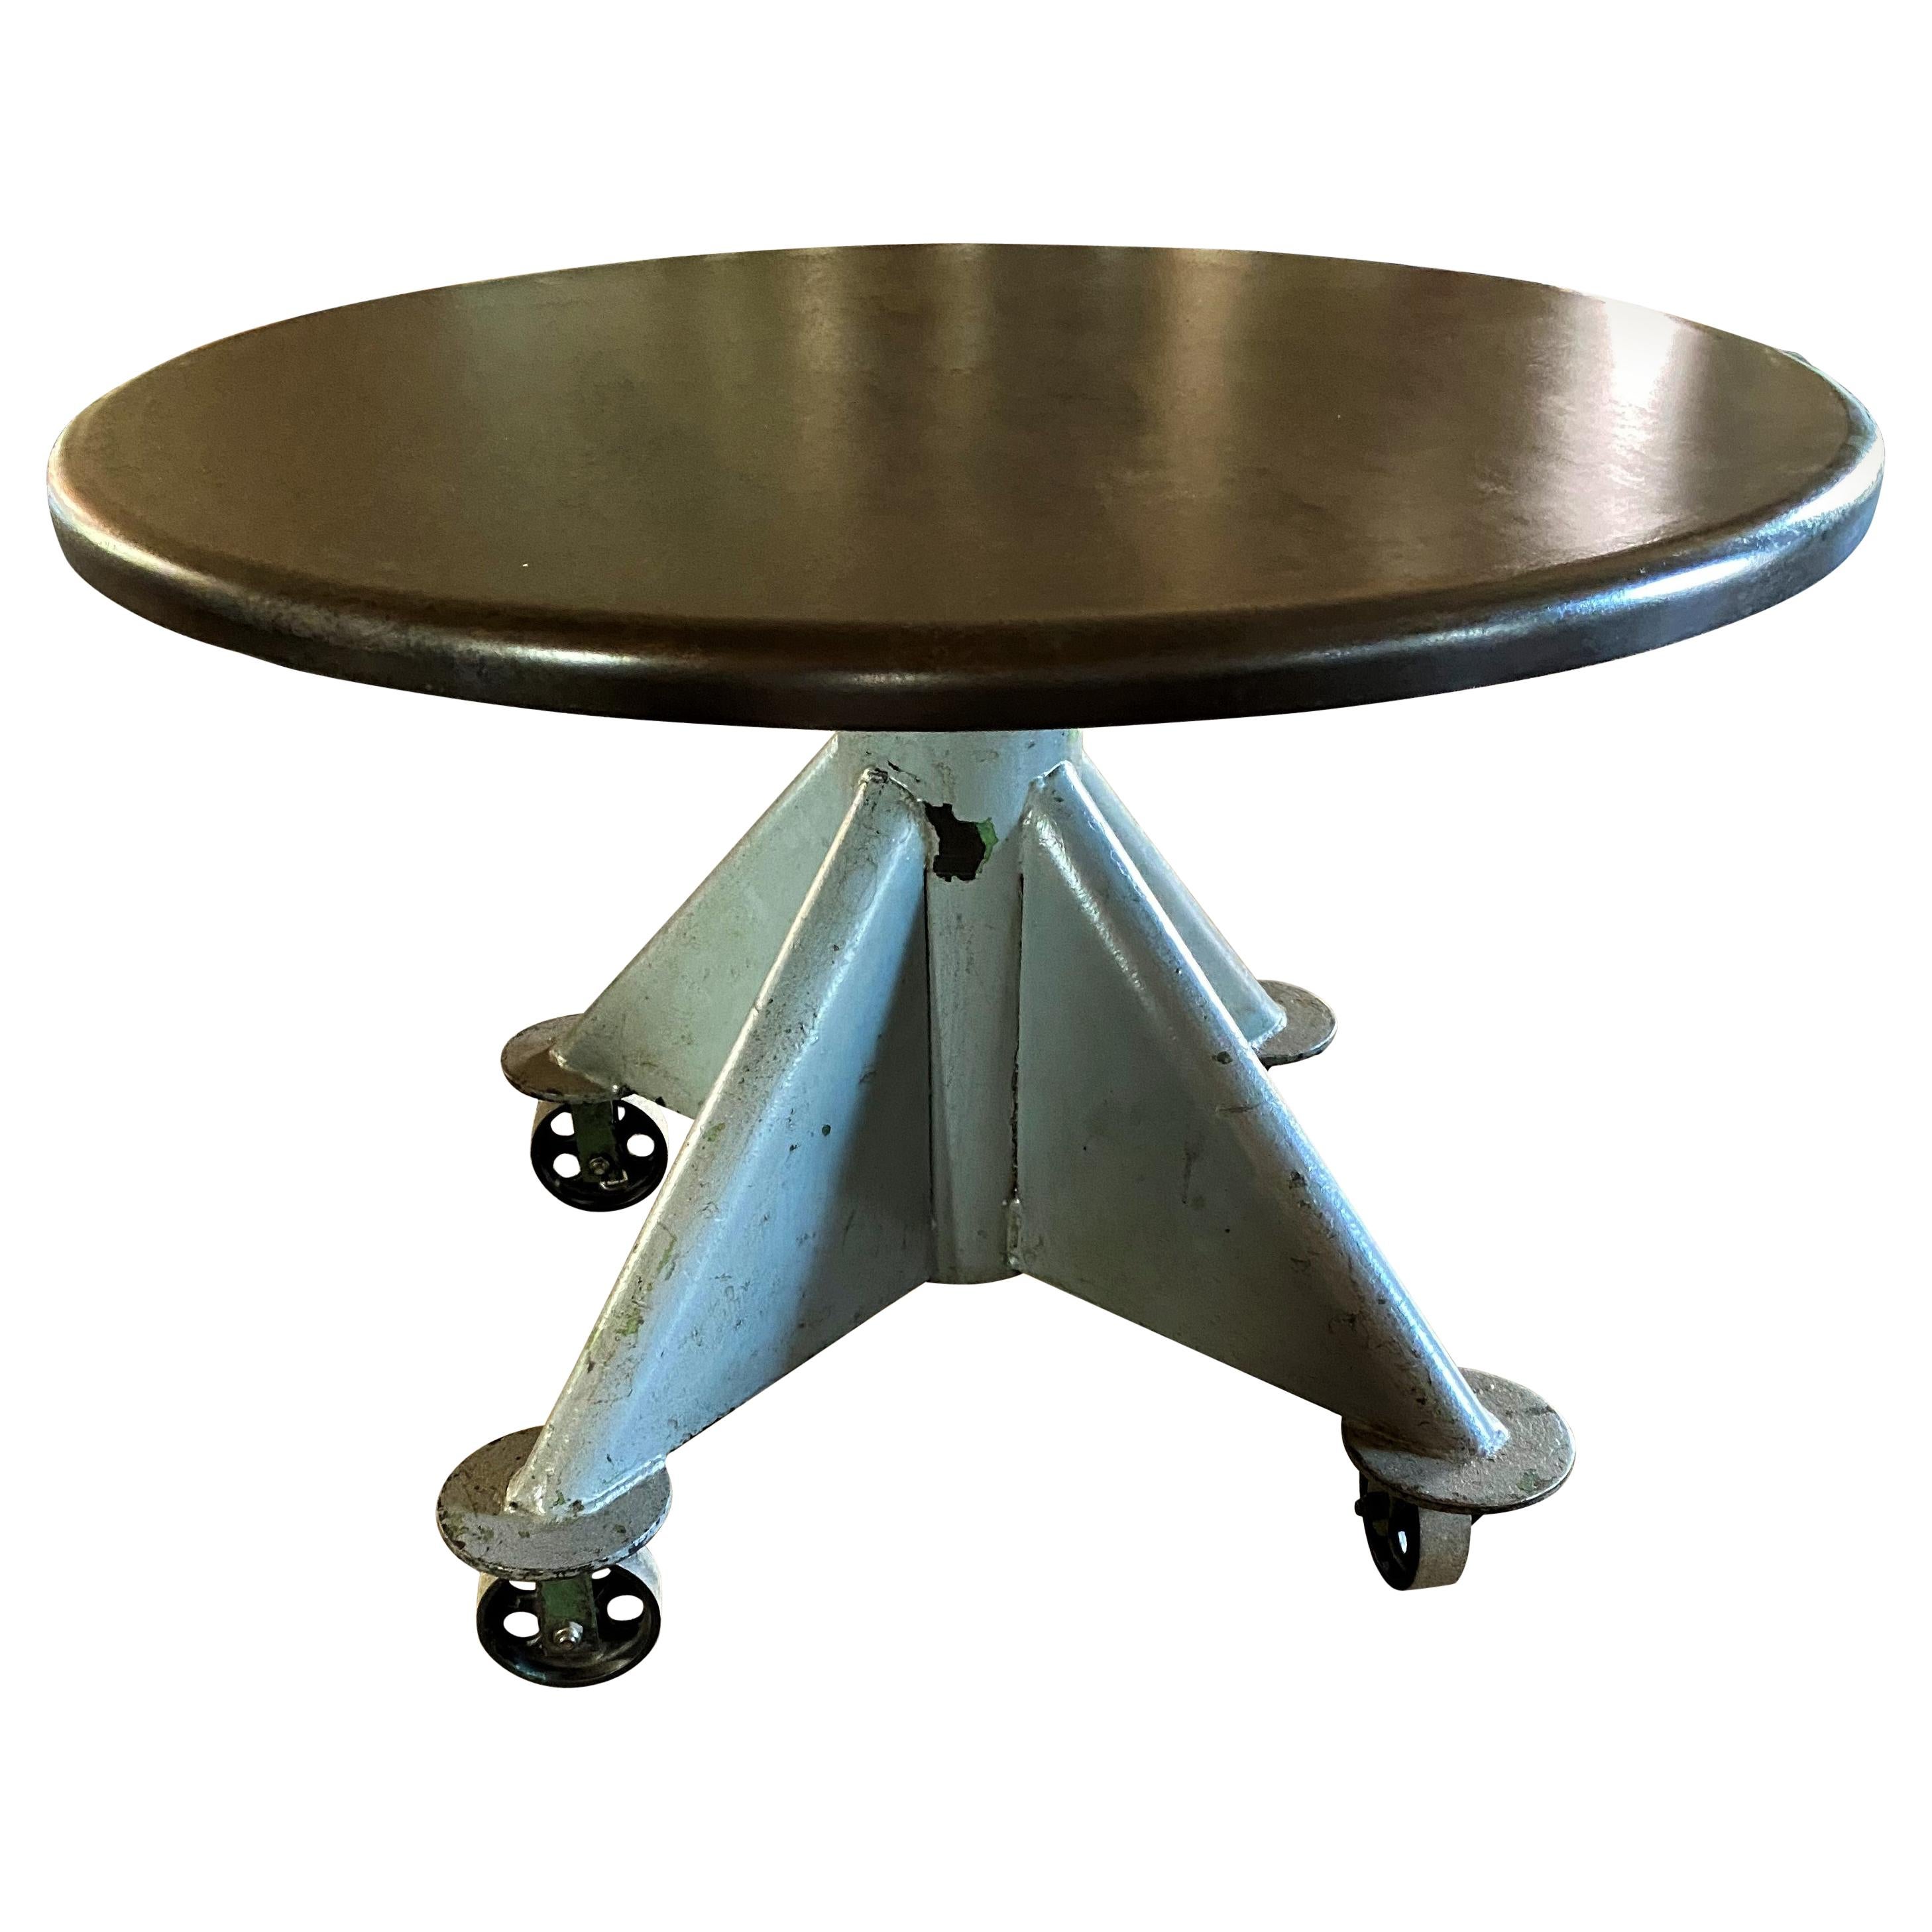 Vintage Industrial Round Dining Table